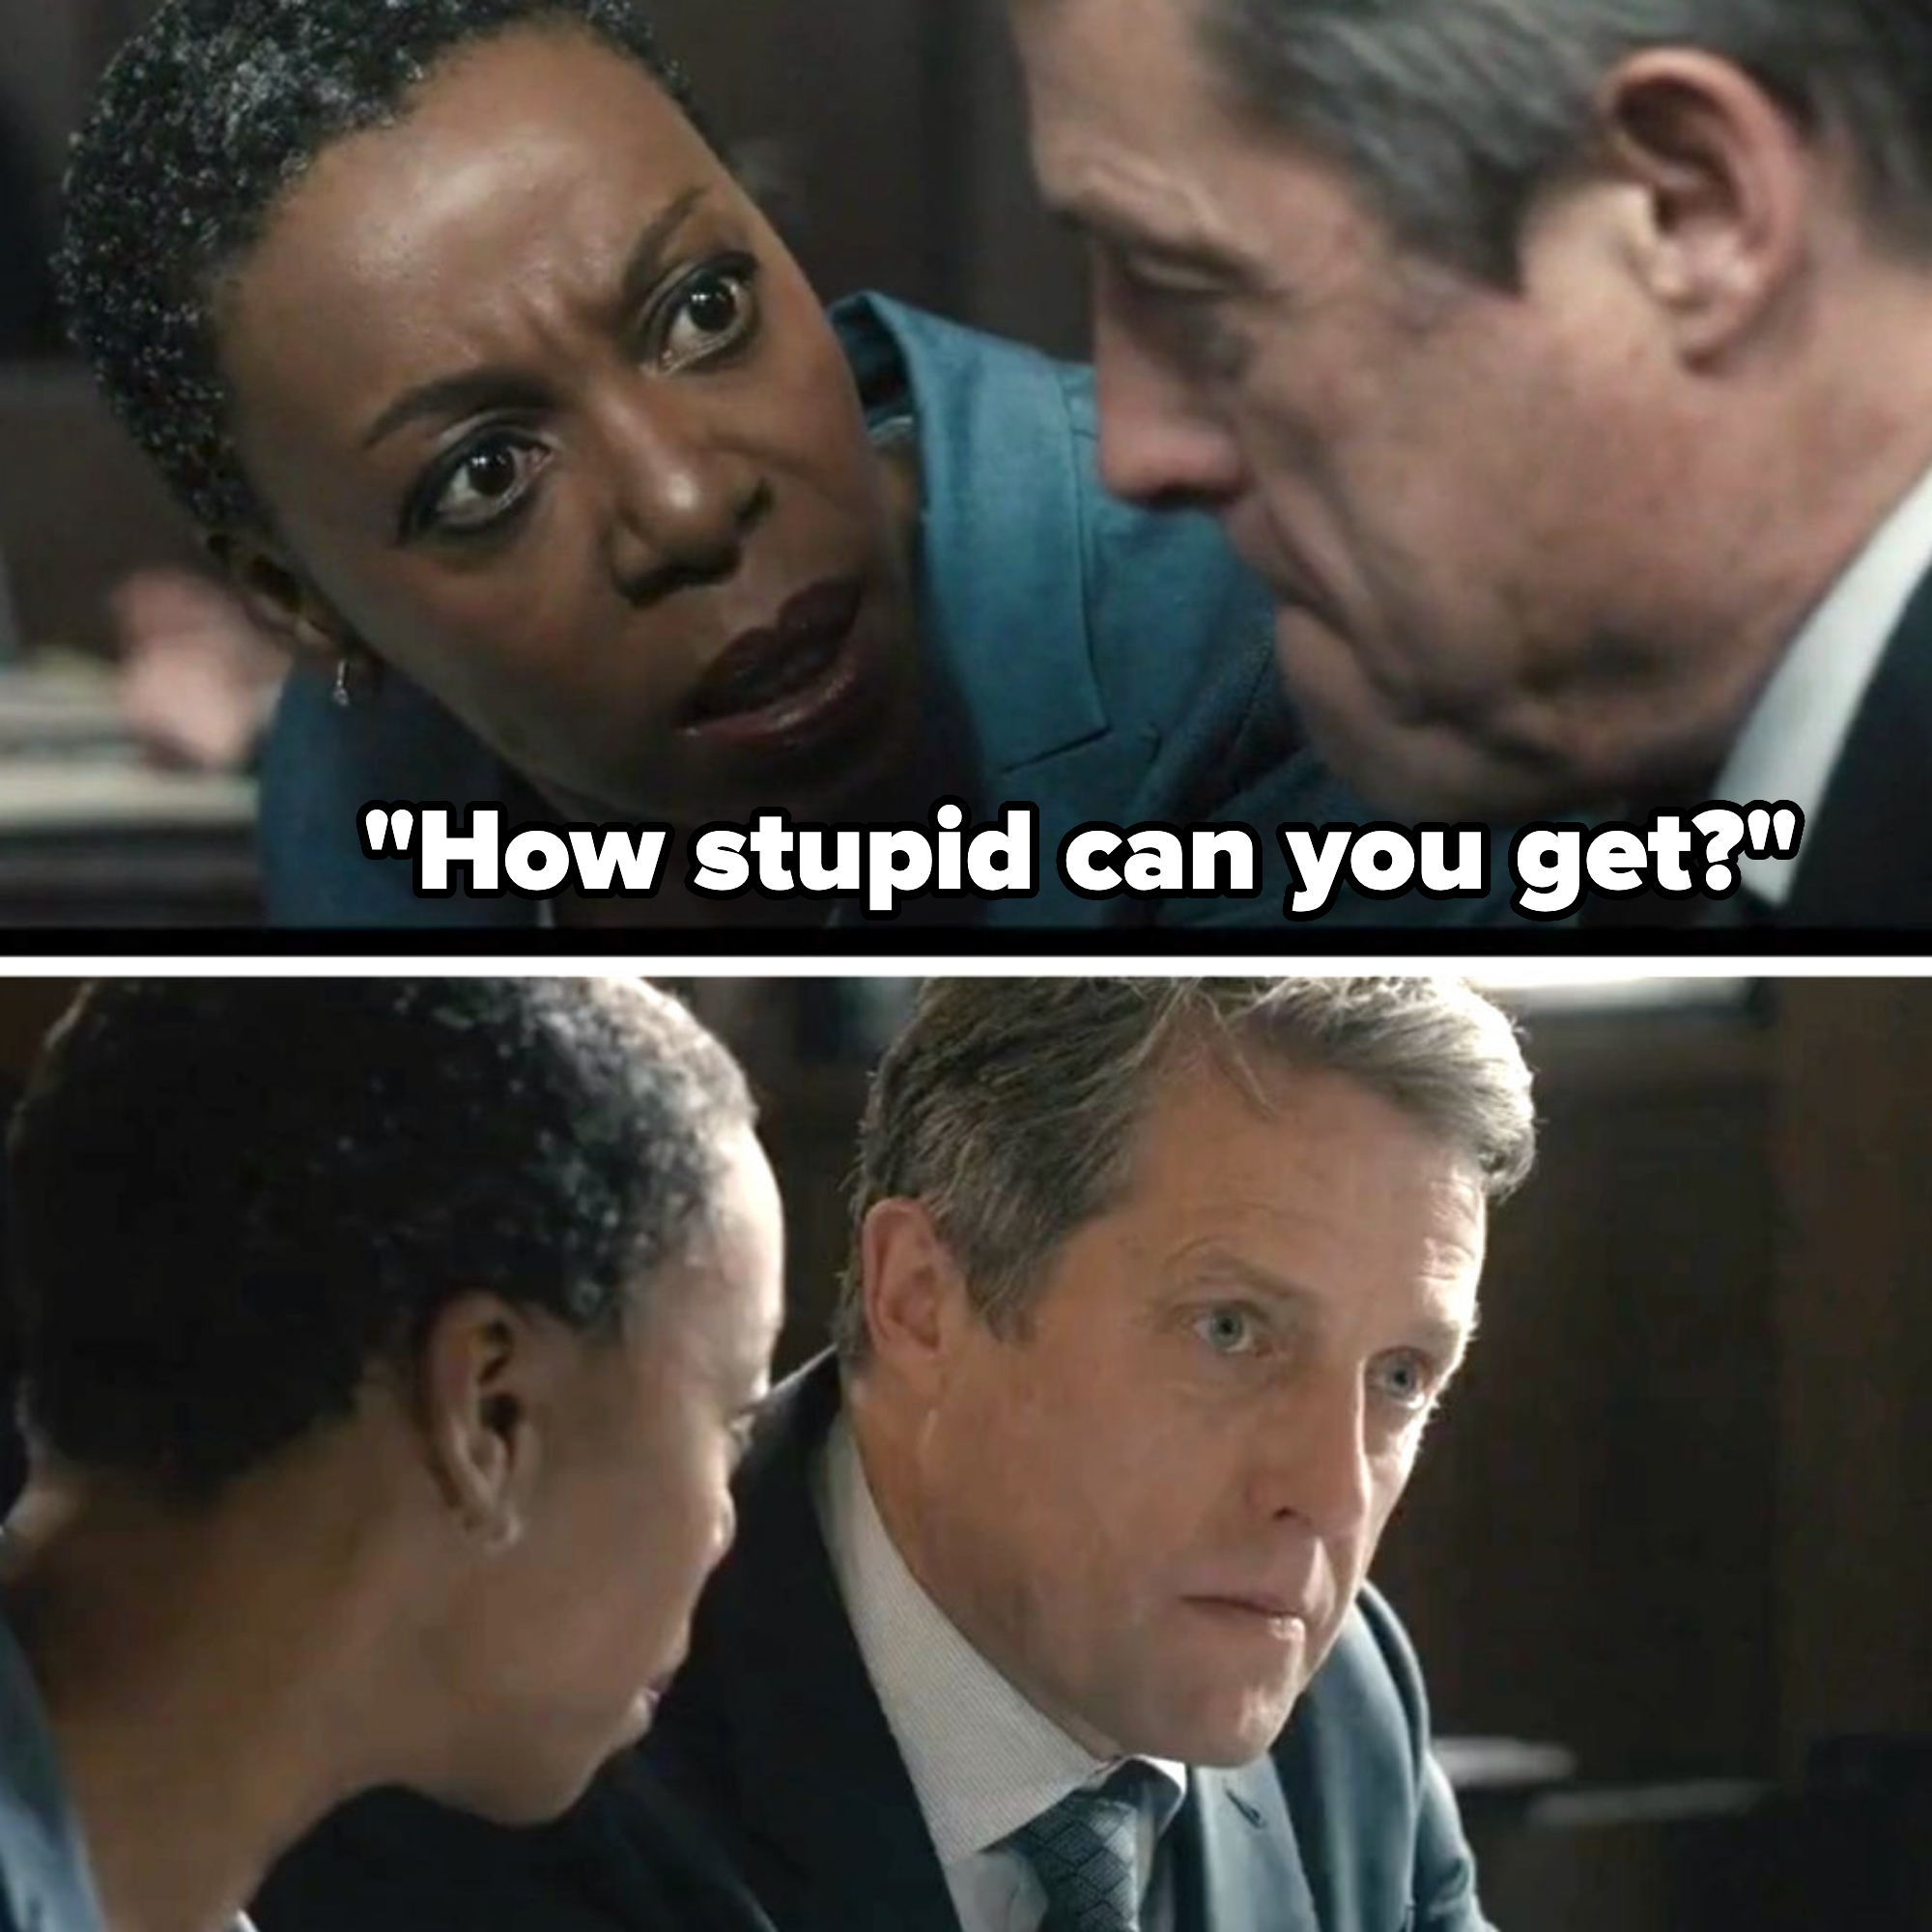 on the undoing, lawyer asks hugh grant&#x27;s character how stupid he can be